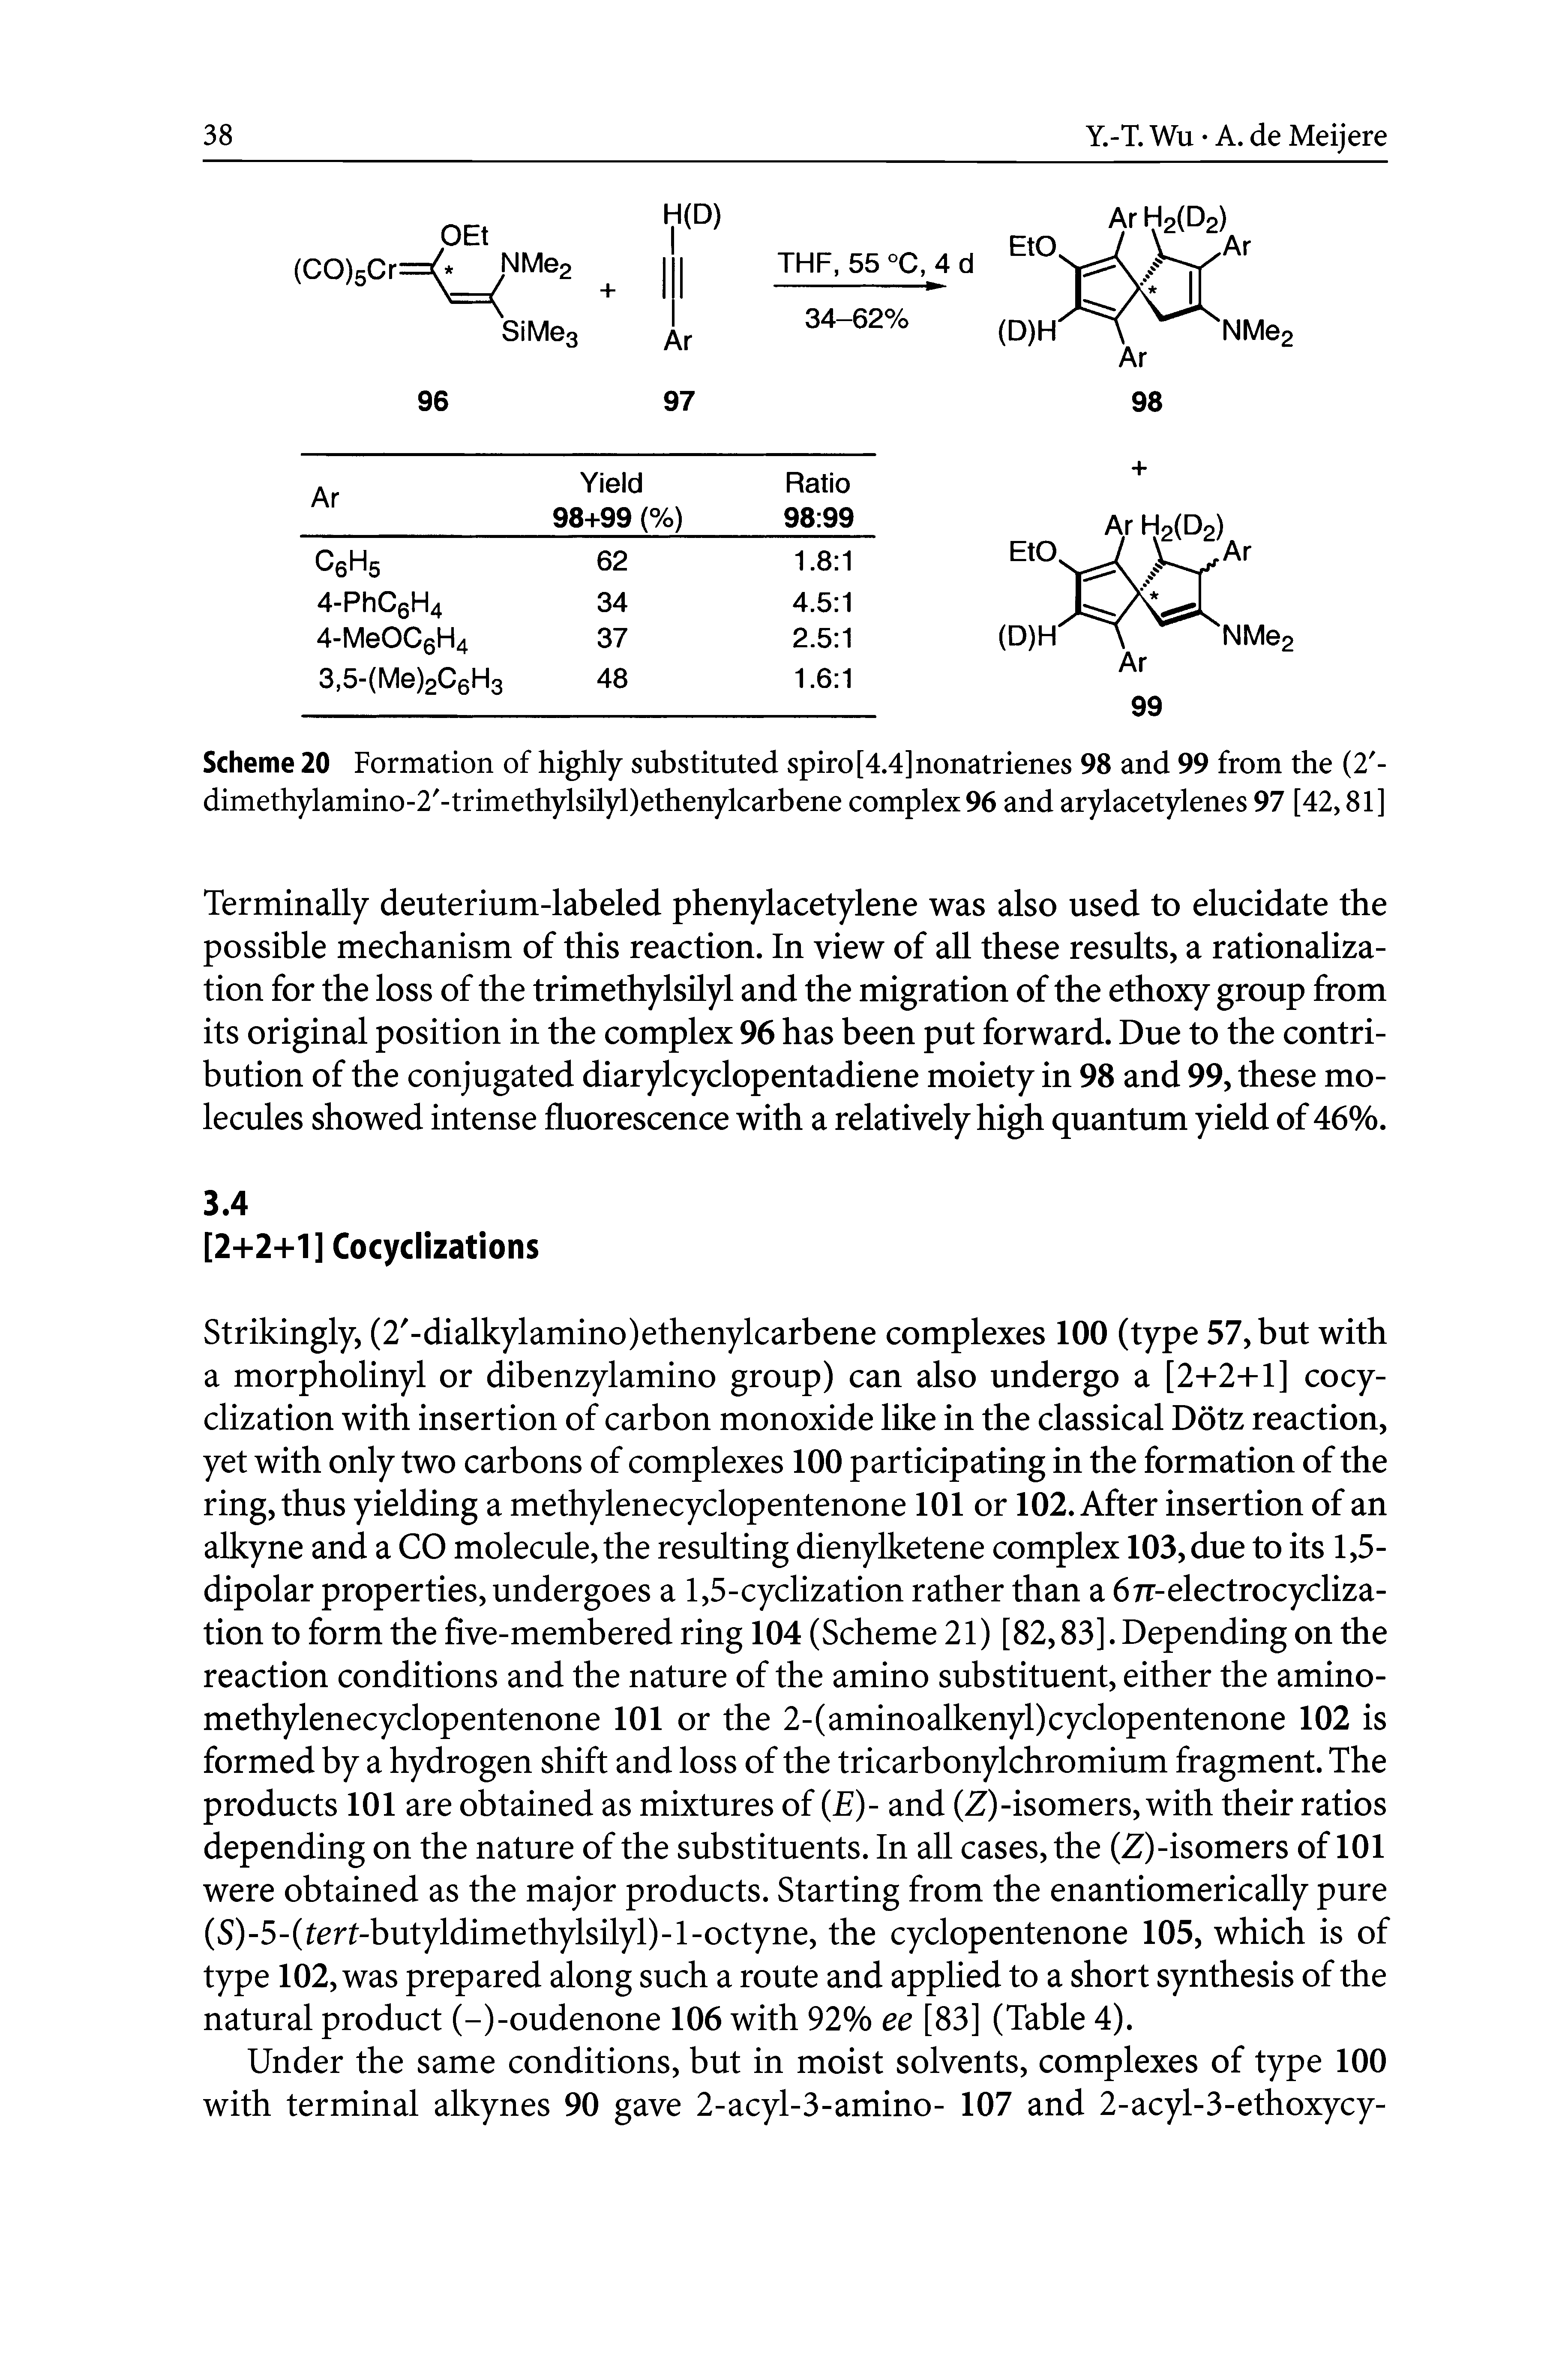 Scheme 20 Formation of highly substituted spiro [4.4]nonatrienes 98 and 99 from the (T-dimethylamino-2 -trimethylsilyl)ethenylcarbene complex 96 and arylacetylenes 97 [42,81]...